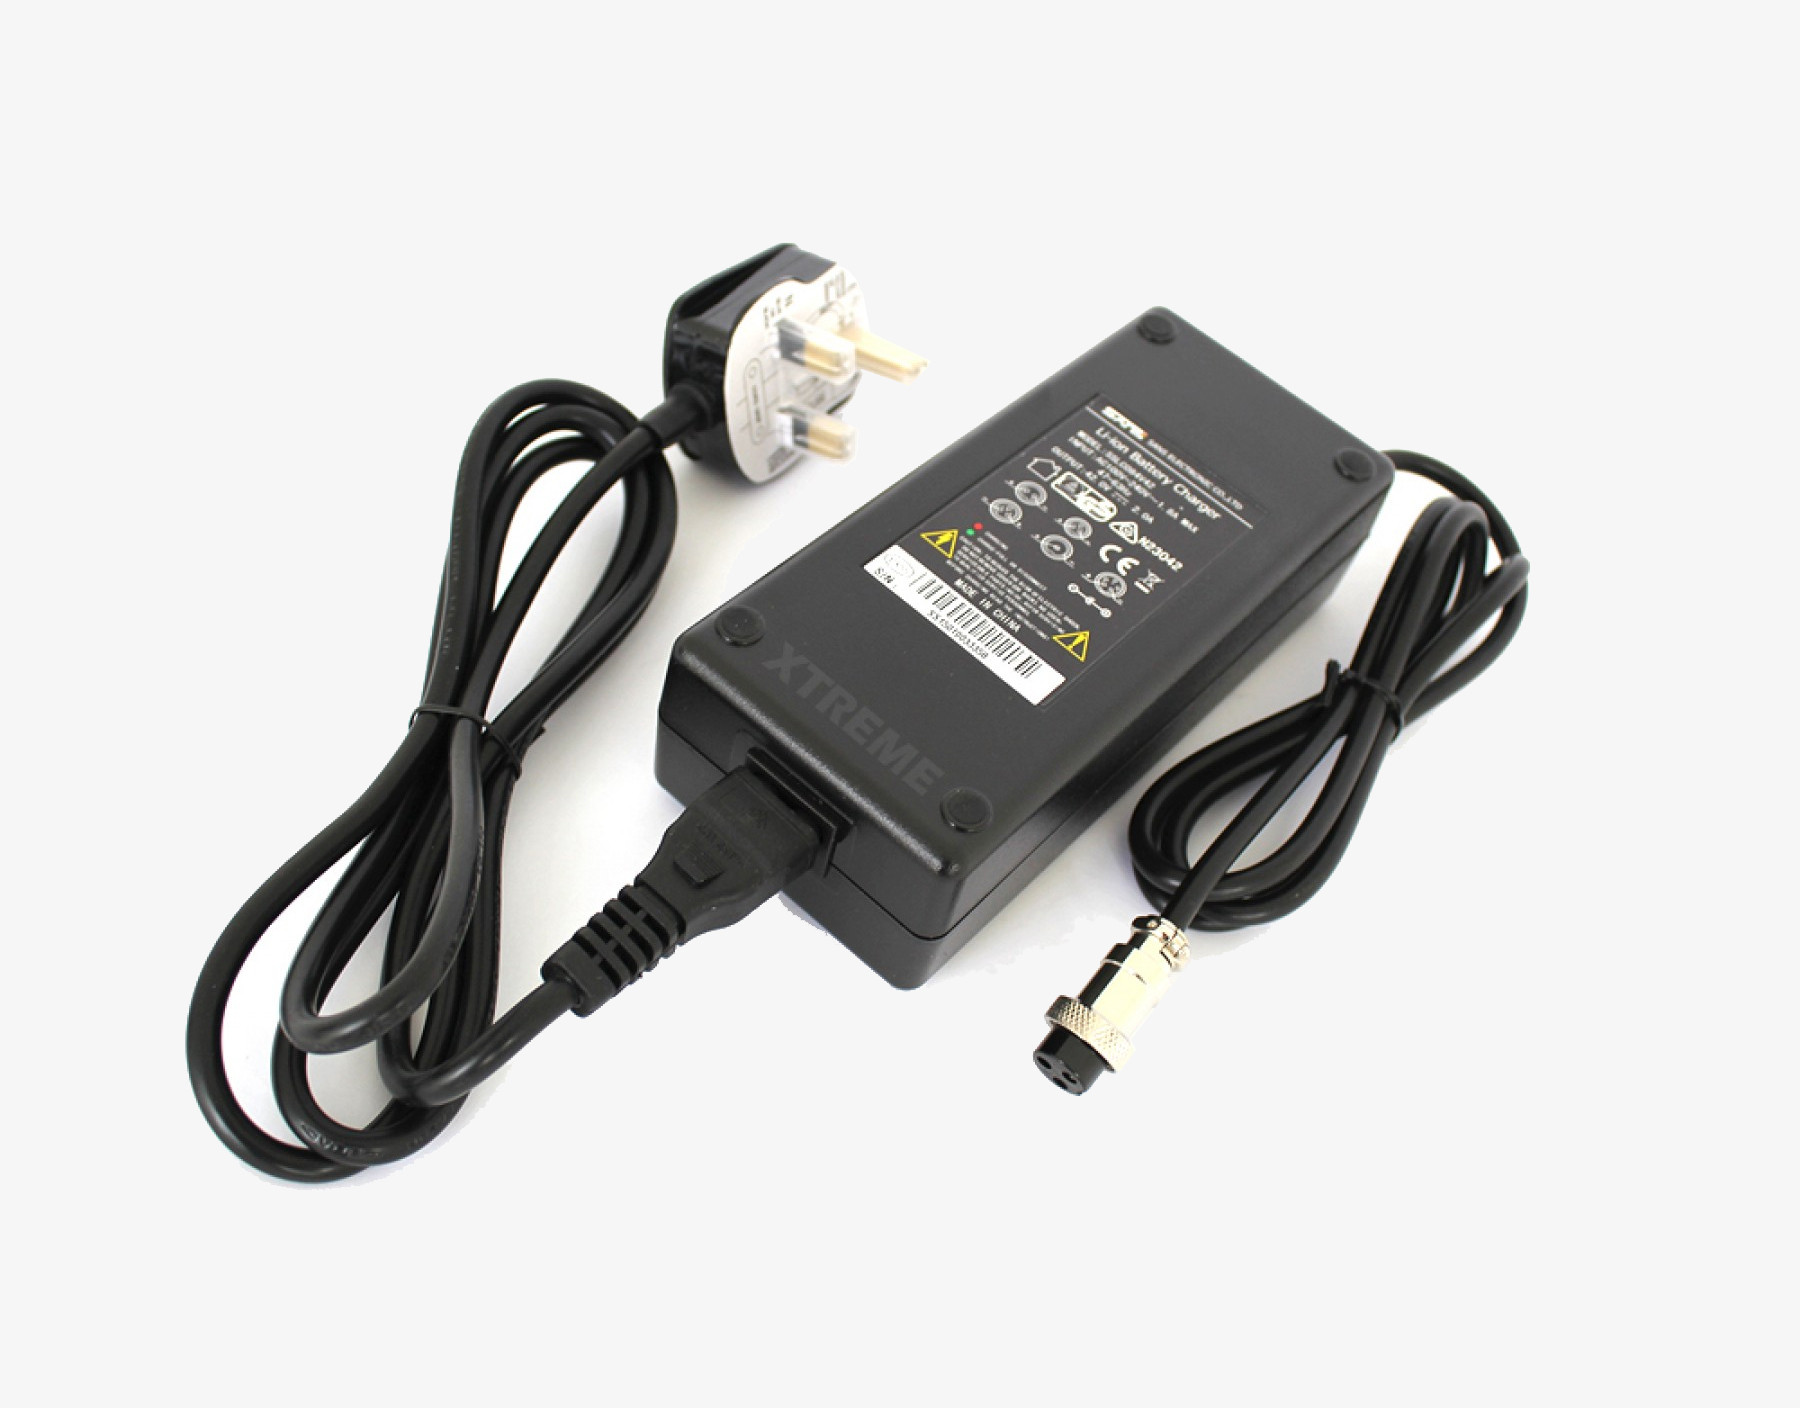 ELECTRIC 36v LITHIUM BATTERY CHARGER MINI QUAD / DIRT / MOTOR BIKE / SCOOTER